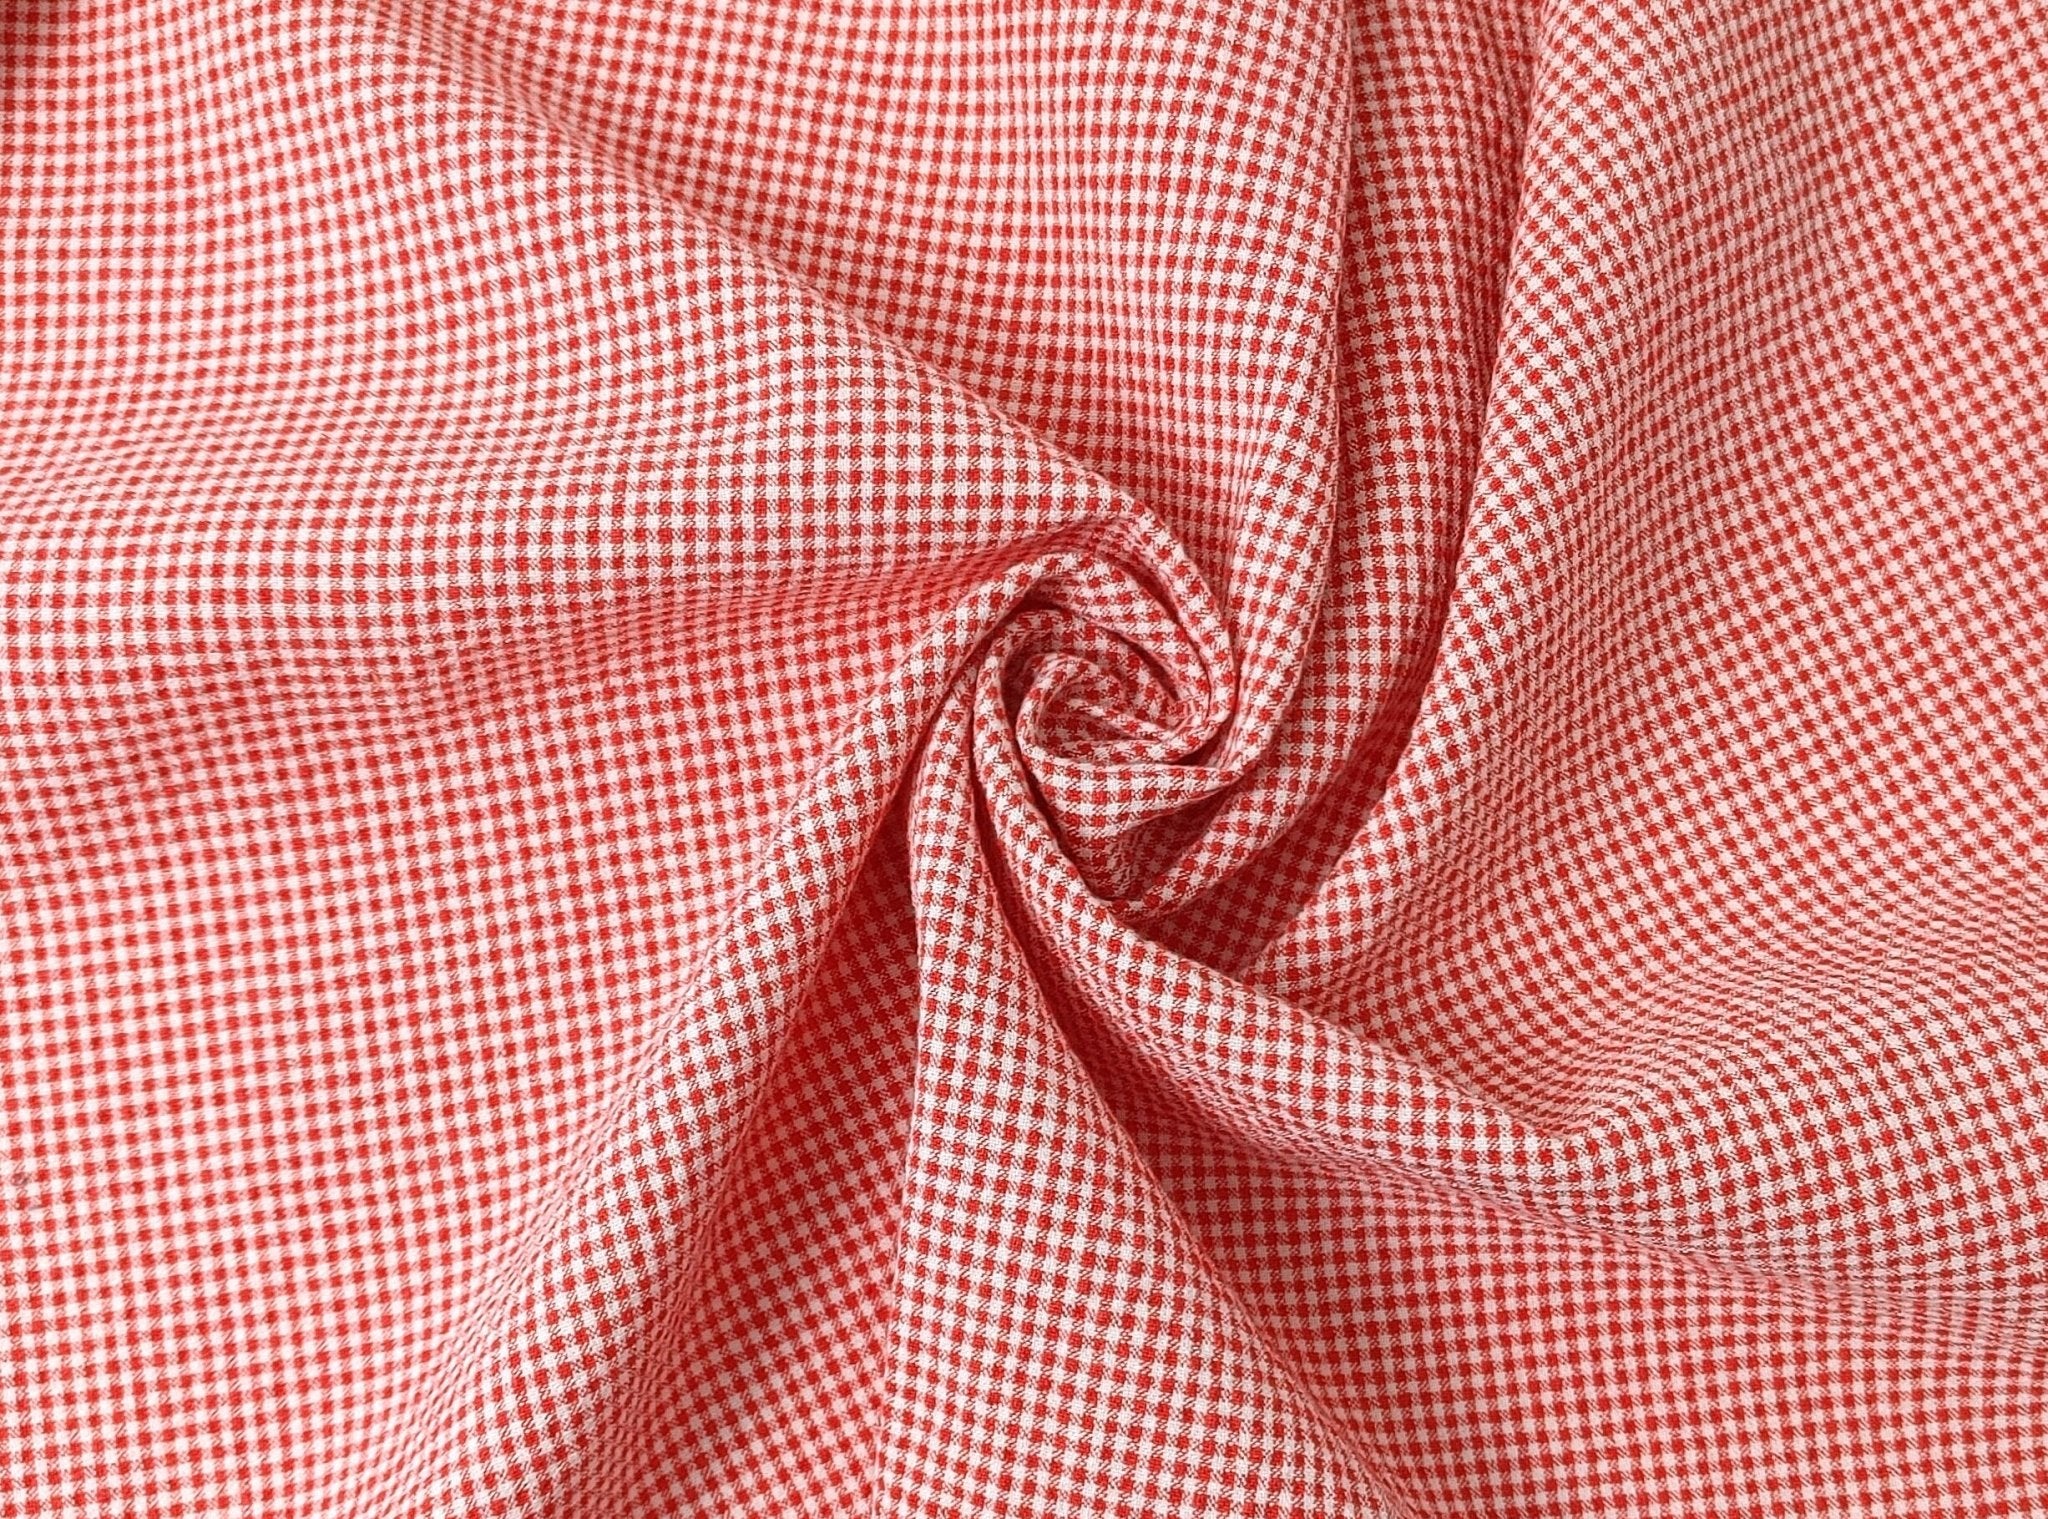 Linen Nylon Cotton Small Check Fabric with Subtle Seersucker Effect - A Blend of Comfort and Style 7635 7636 - The Linen Lab - Green